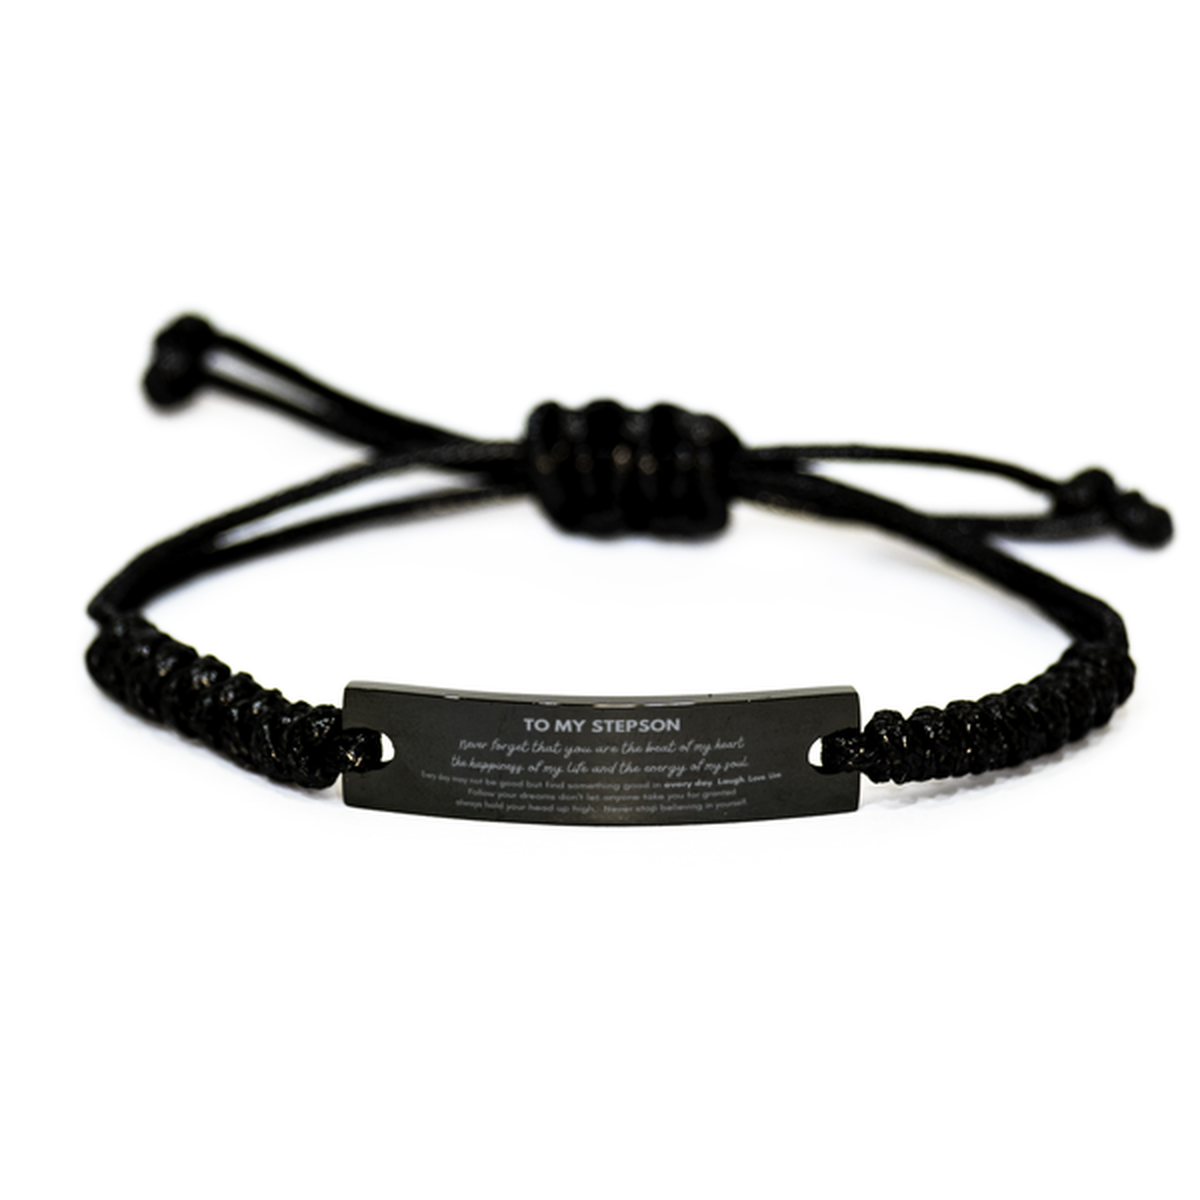 To My Stepson Bracelet Gifts, Christmas Stepson Black Rope Bracelet Present, Birthday Unique Motivational For Stepson, To My Stepson Never forget that you are the beat of my heart the happiness of my life and the energy of my soul